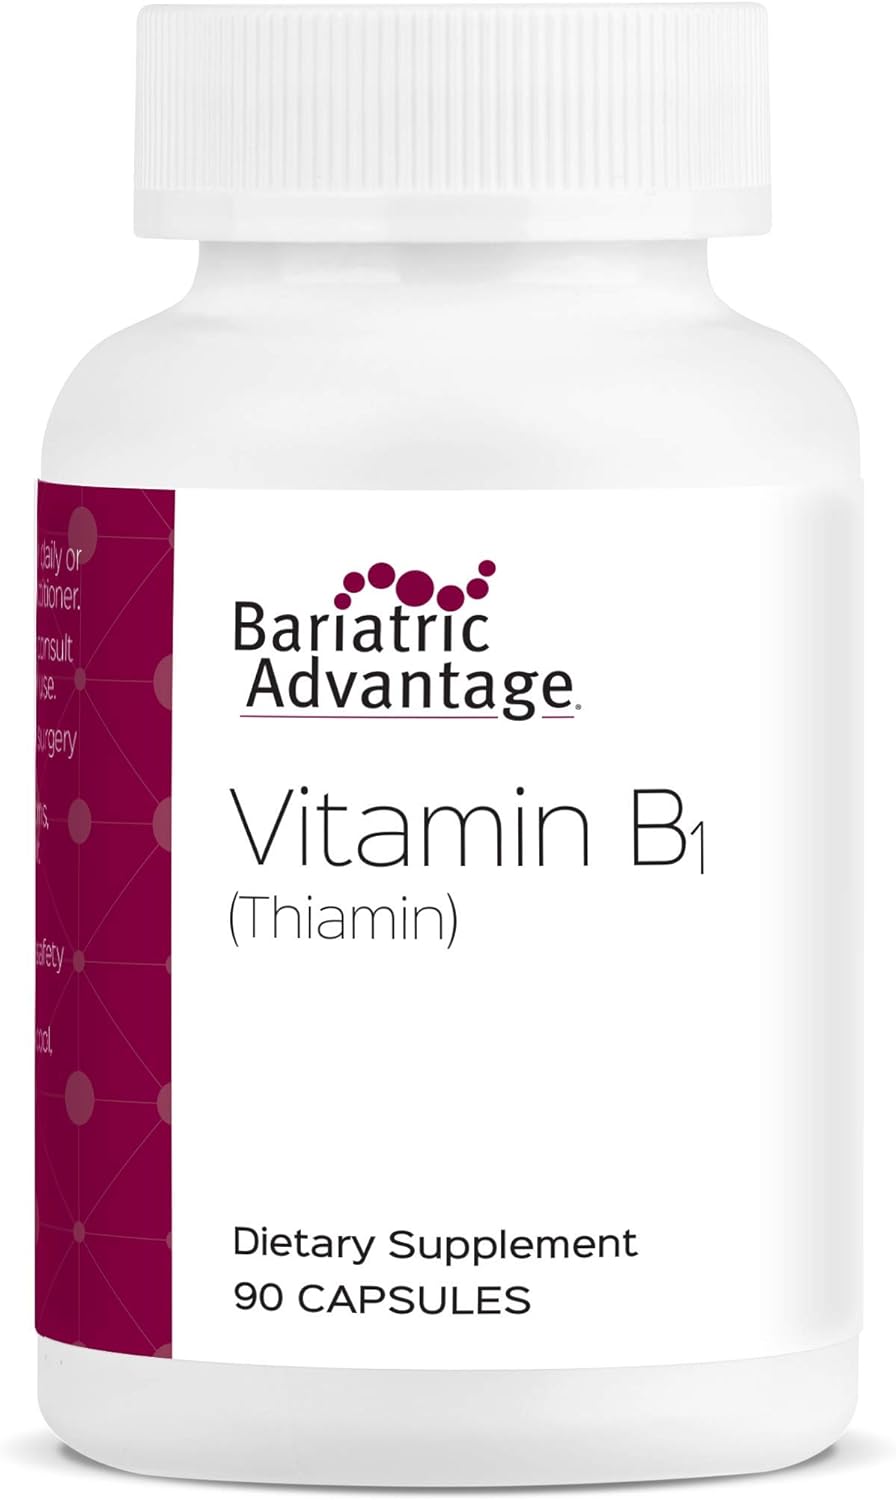 Bariatric Advantage Vitamin B1 thiamin - 100 mg Thiamin Mononitrate - Easy Digest - Designed for Bariatric Patients - Supports Energy Production* - Bariatric Supplement - 90 Count